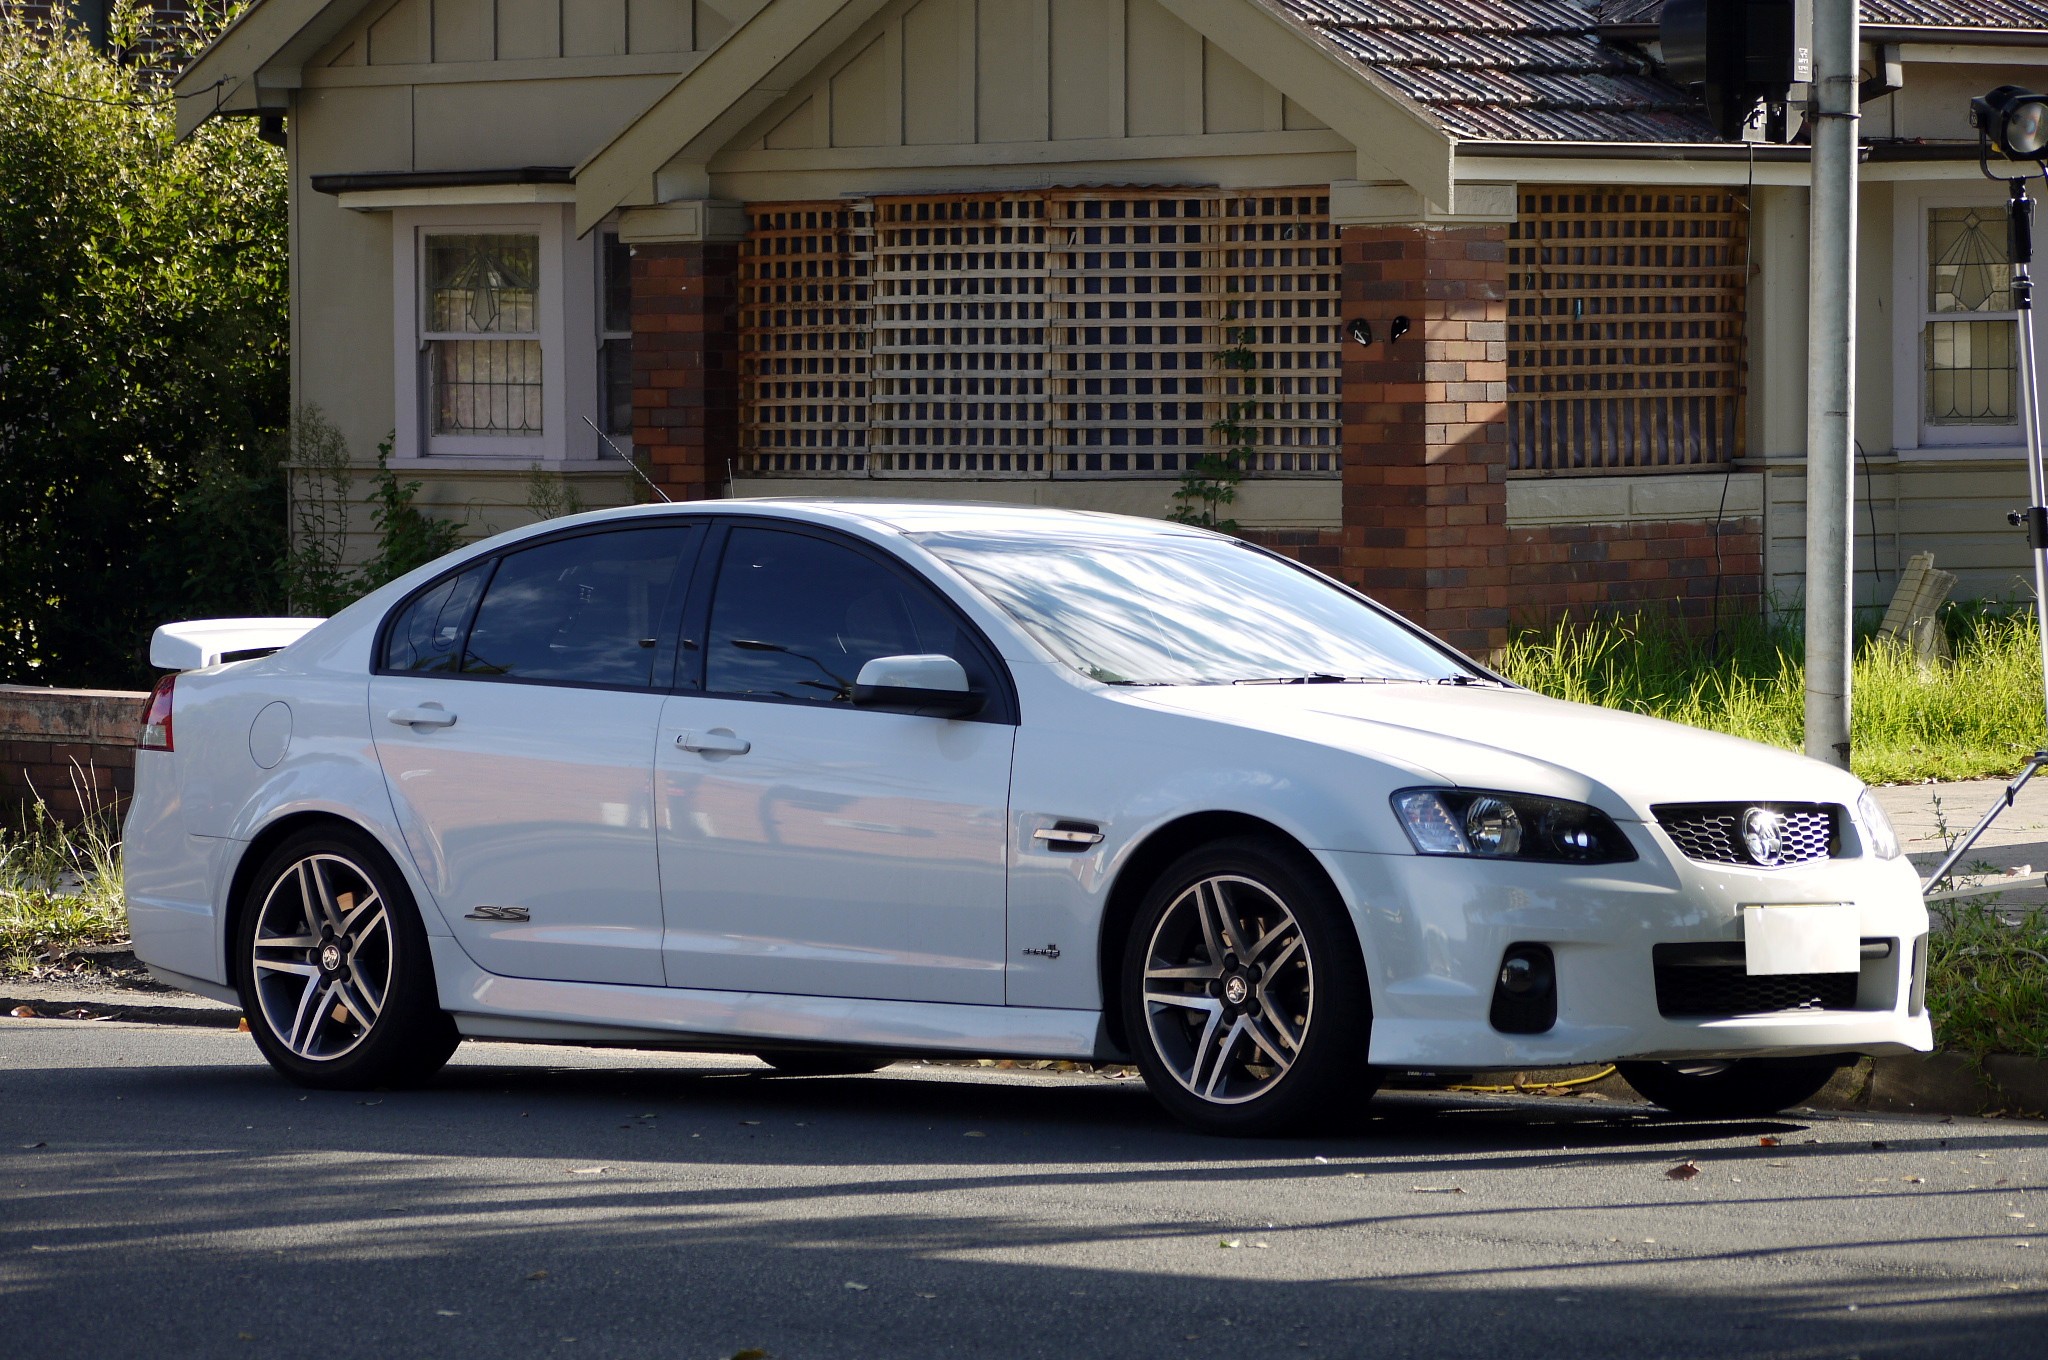 Bankstown 221 Commodore SS - Flickr - Highway Patrol Images